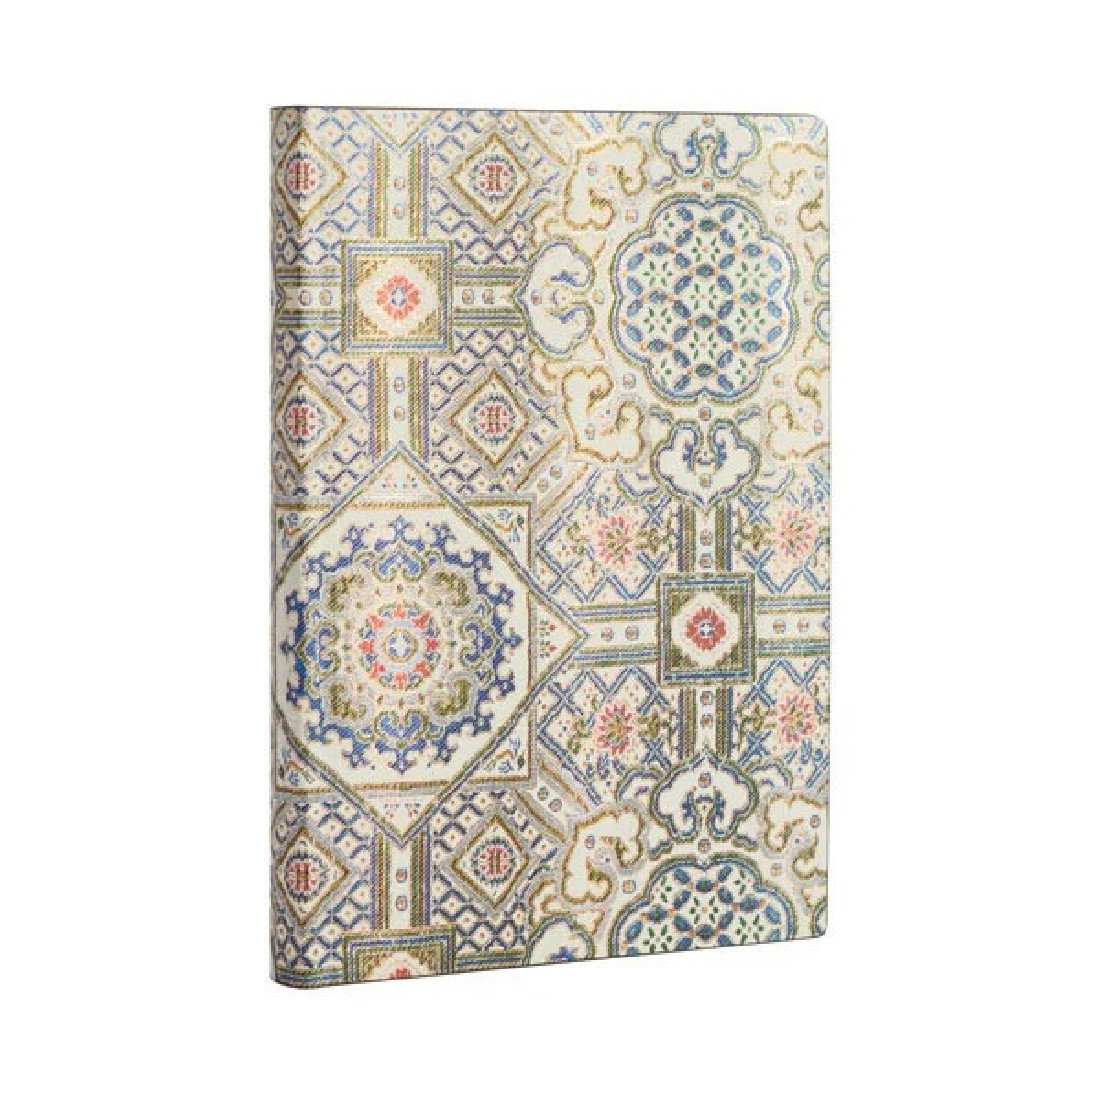 Paperblanks softcover flexi notebook, lined, midi 13x18cm, 176 pages, 100 gsm, Sacred Thibetian Textiles, Ashta